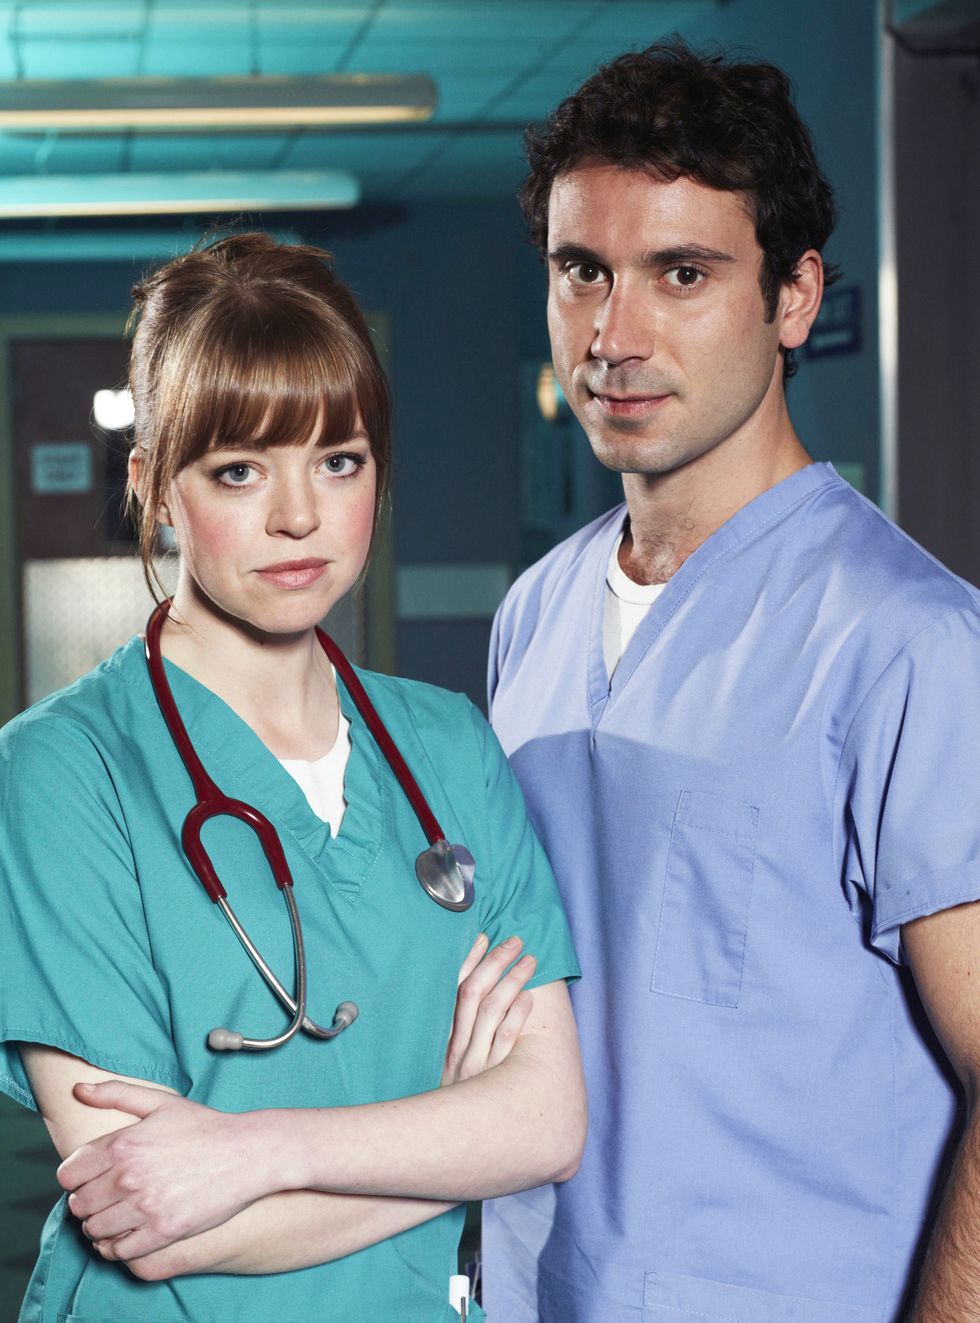 georgia taylor as ruth, ben turner as jay, casualty